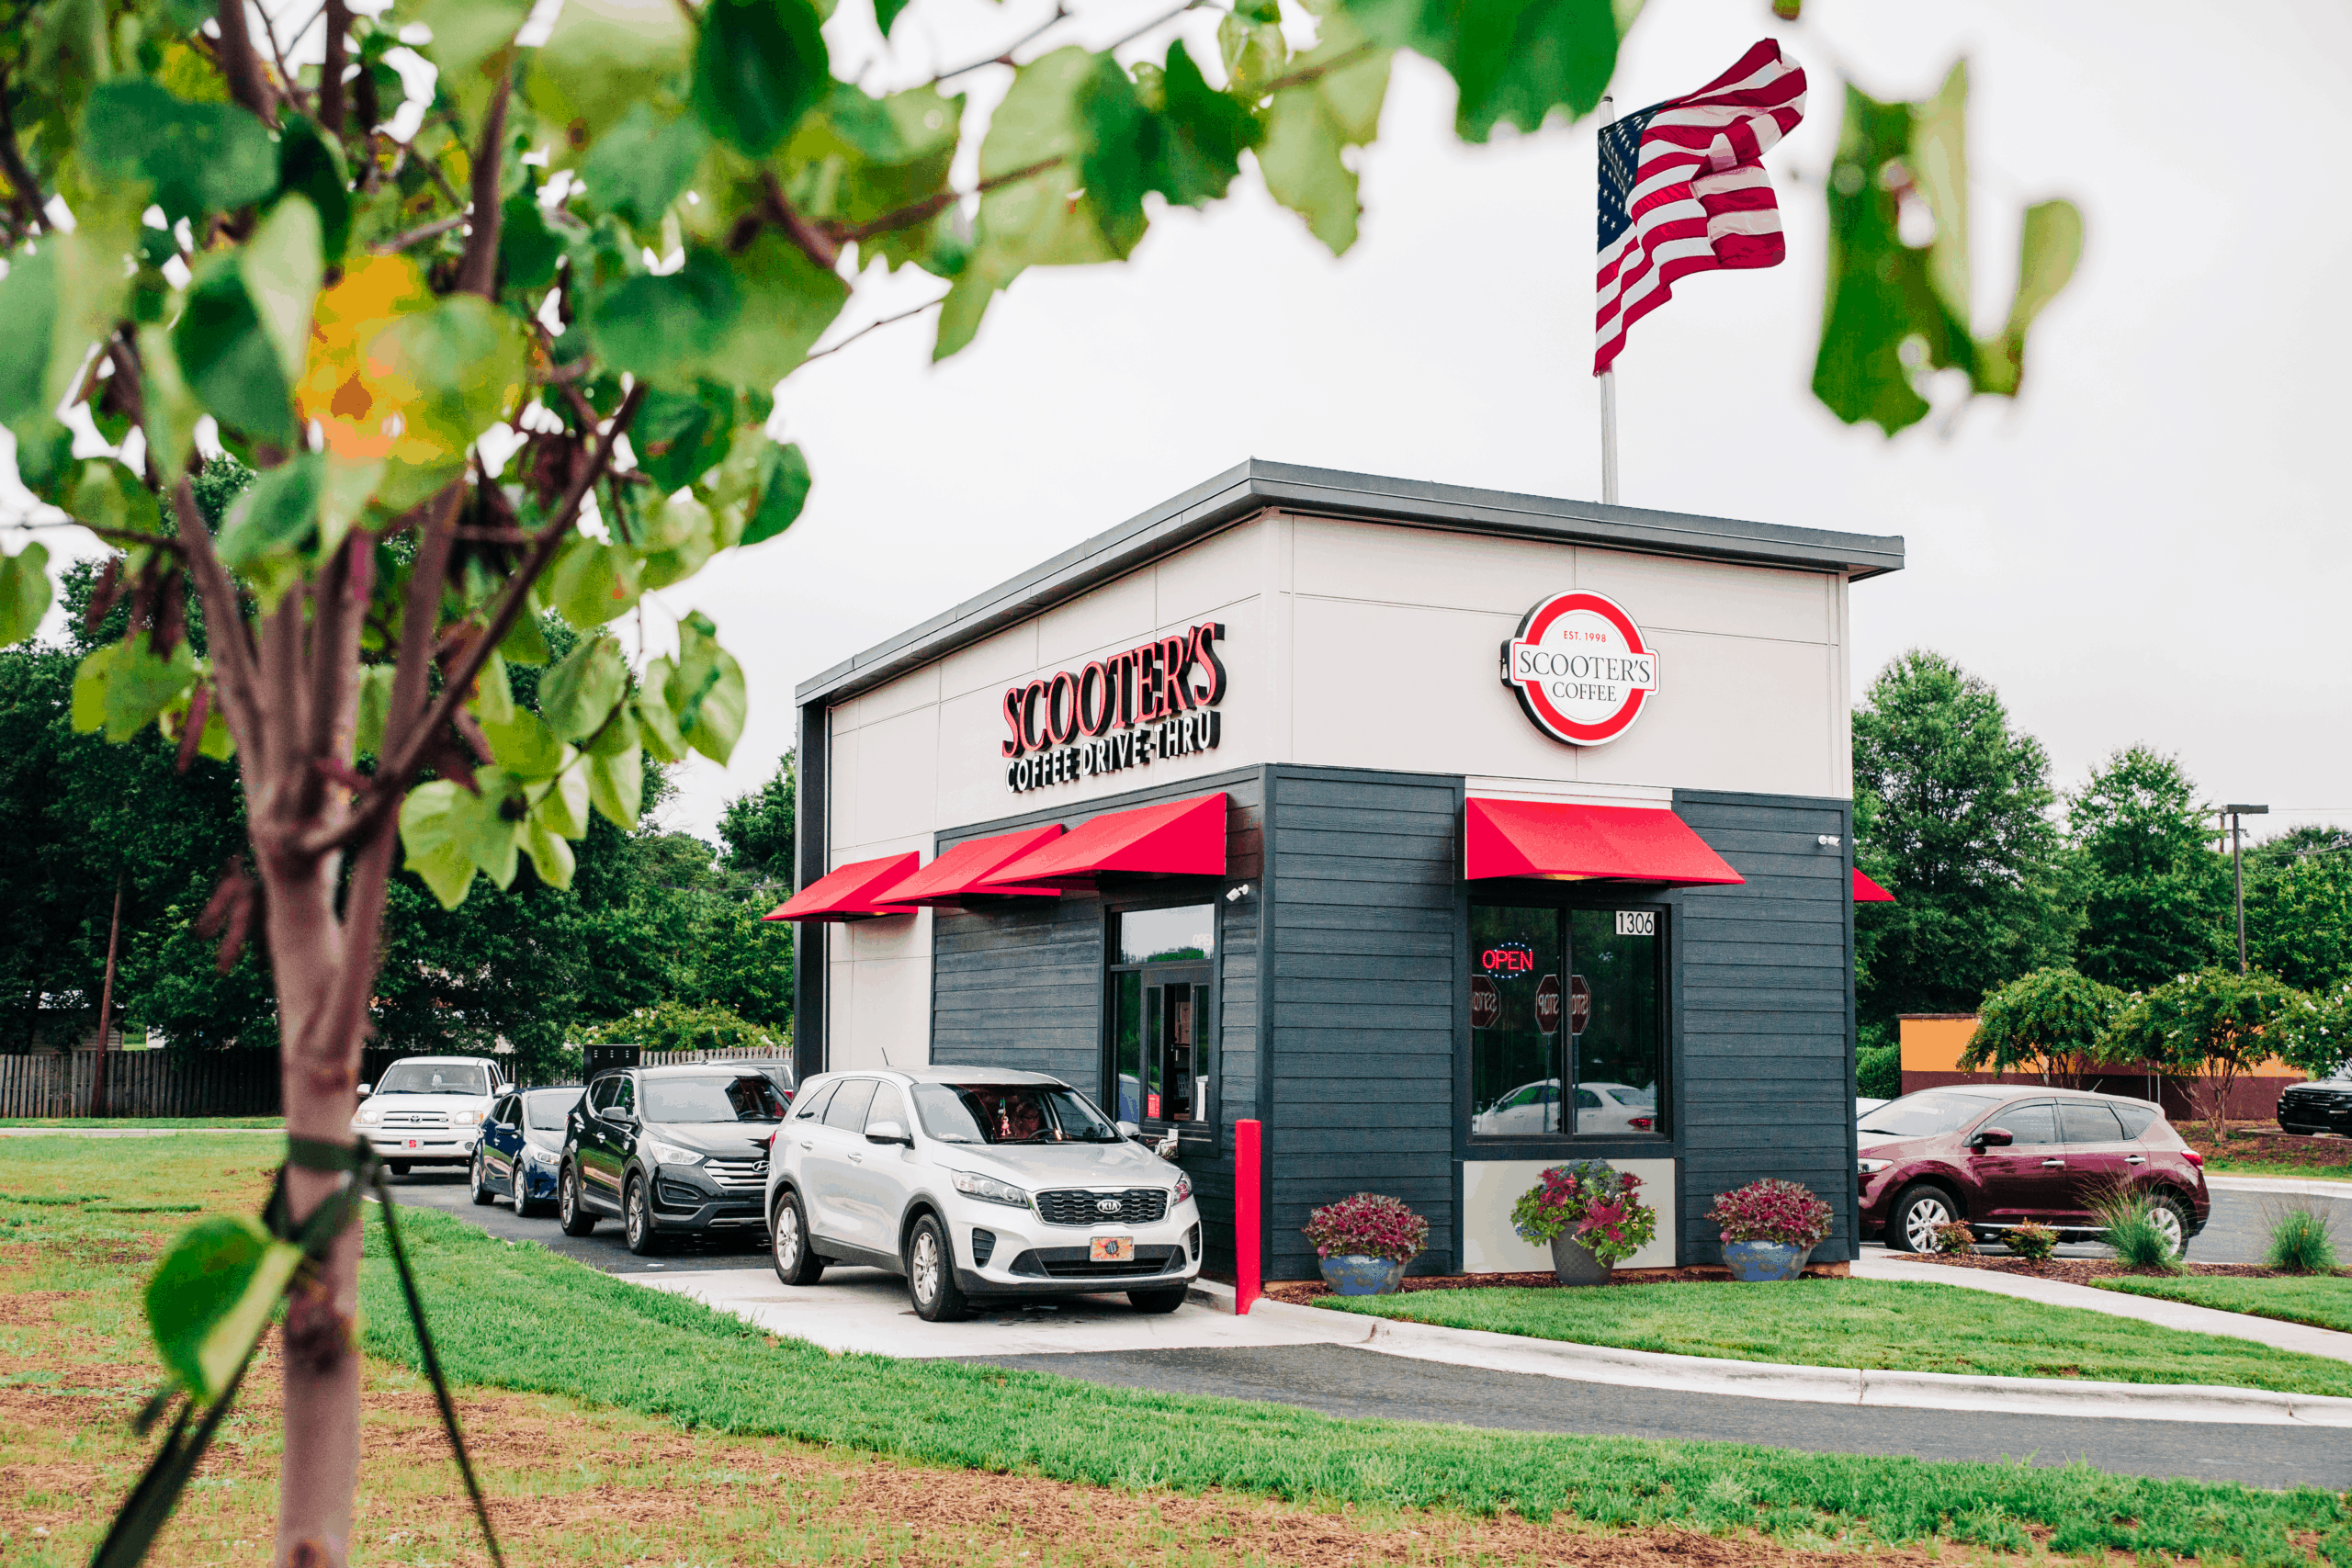 A Scooter's Coffee drive-thru coffee kiosk with an American flag.